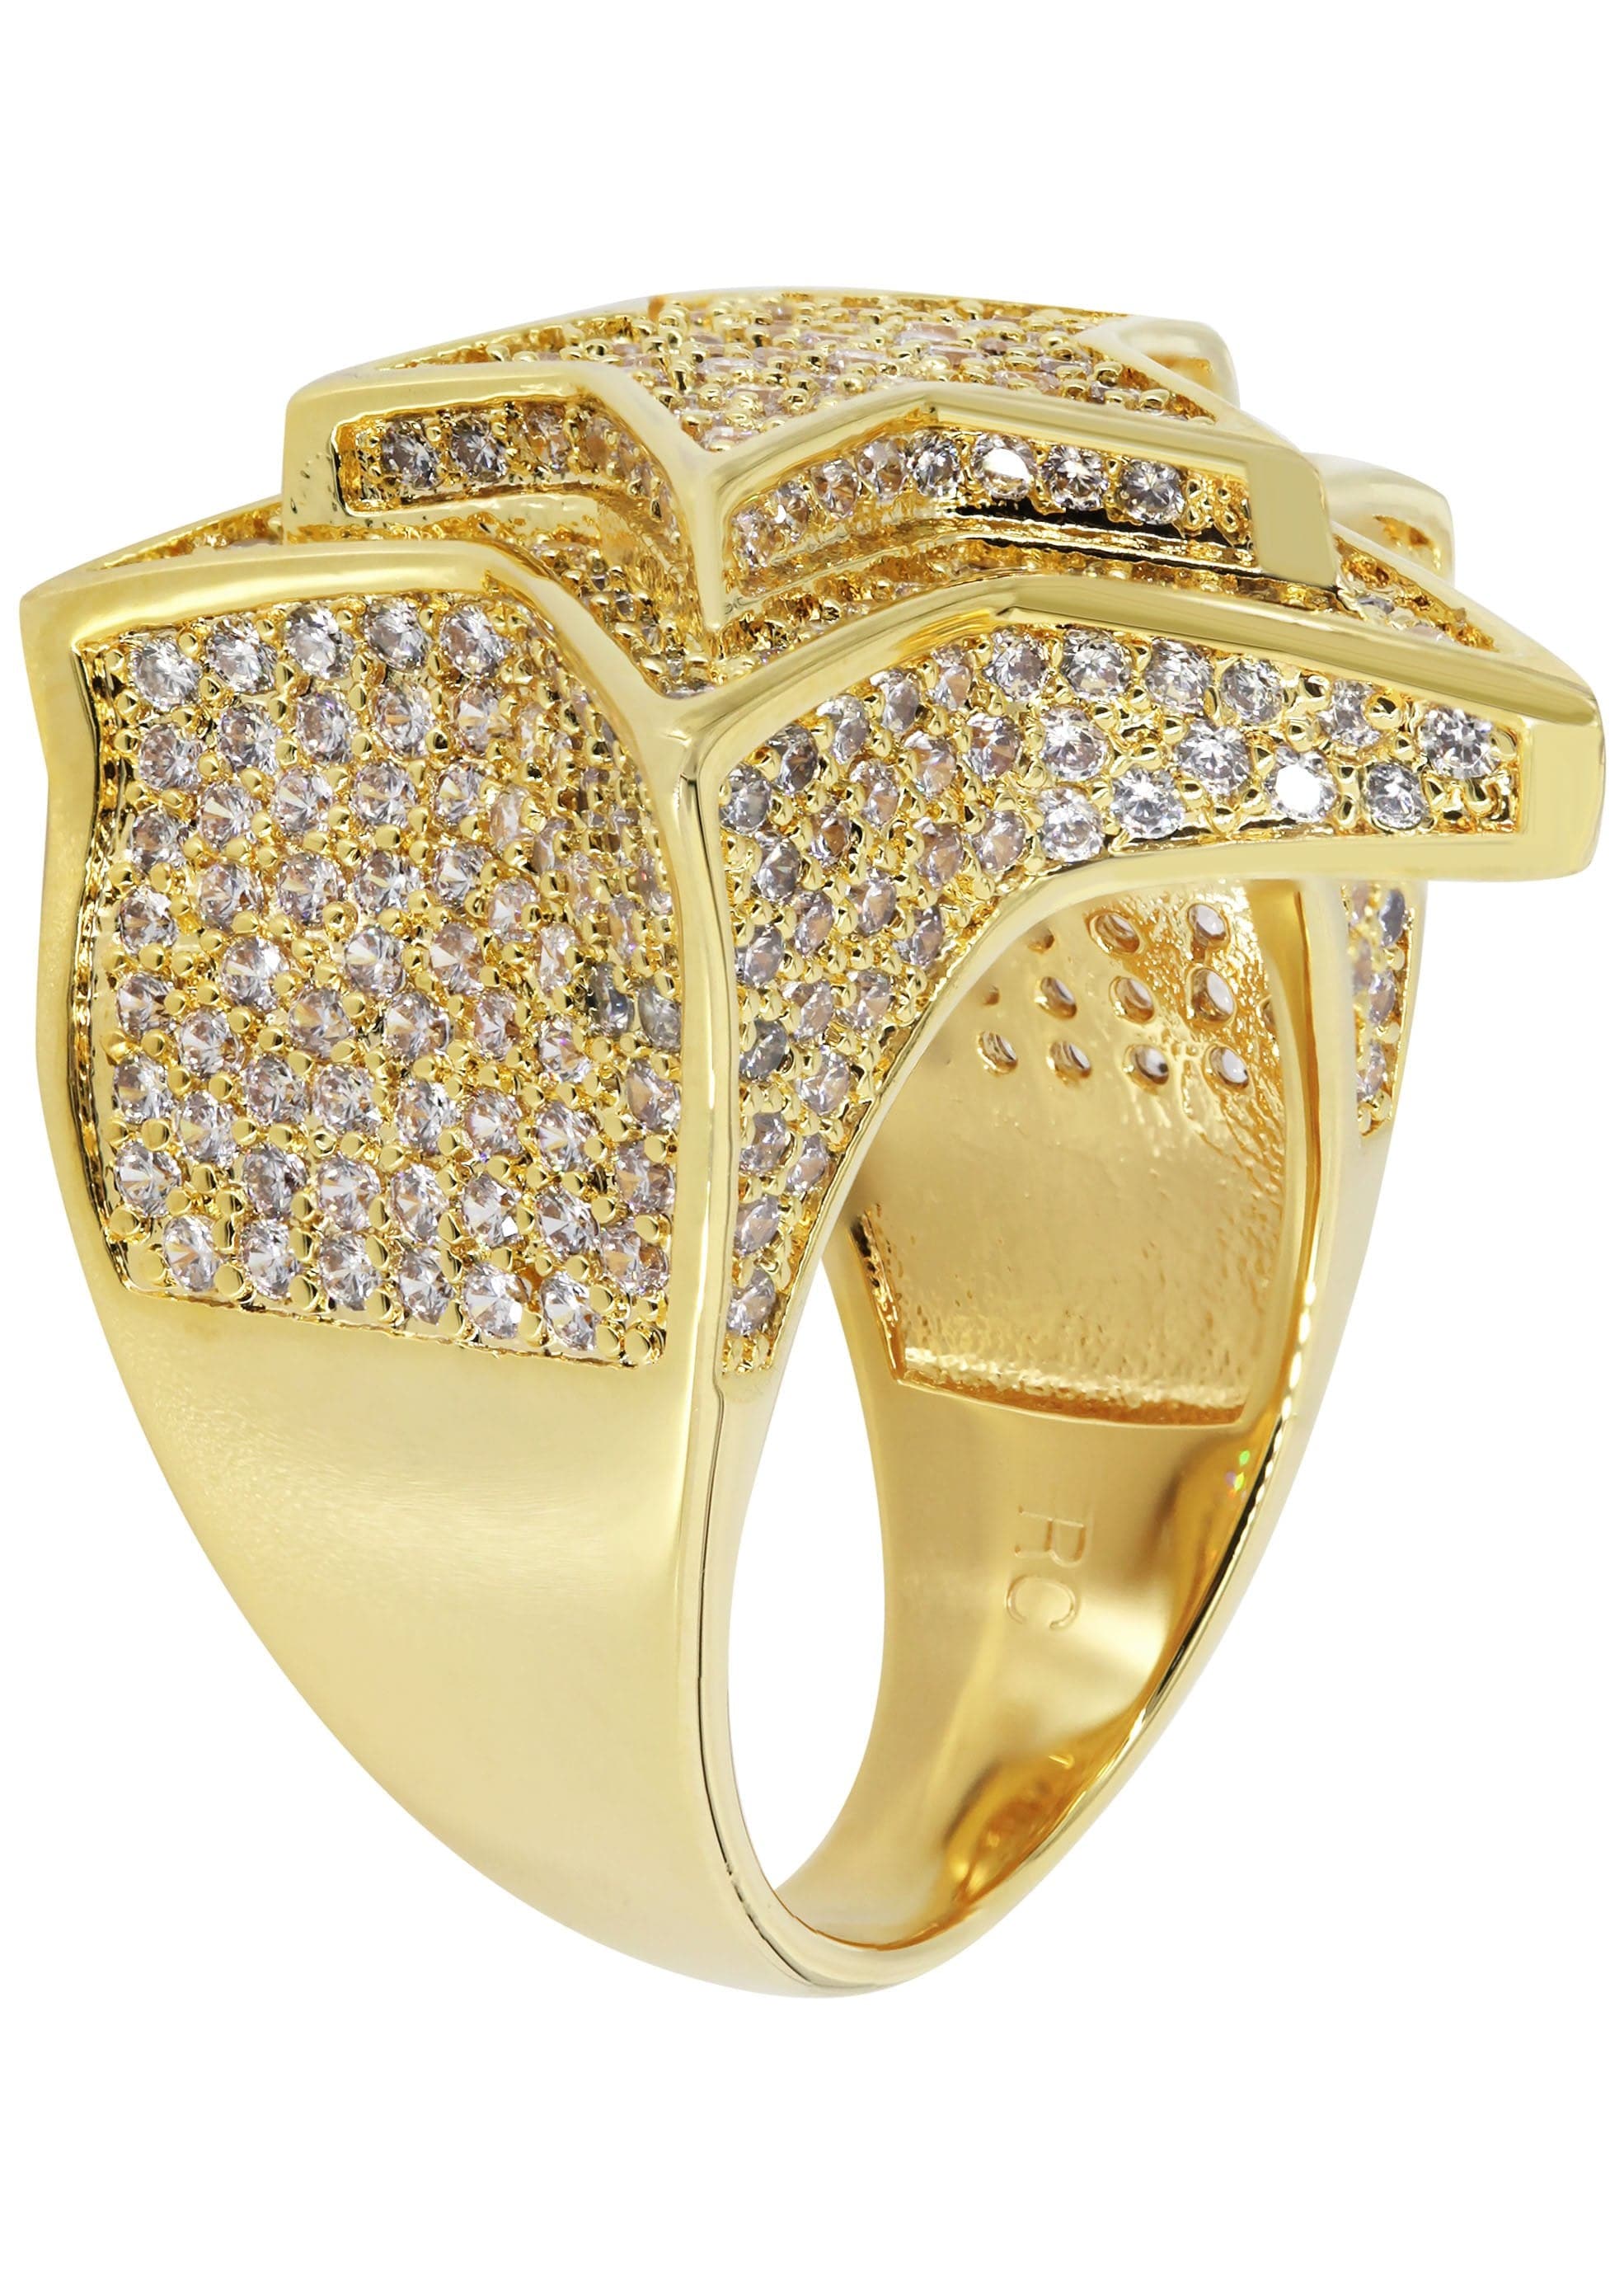  Gold  Plated Star Ring  11 4 Grams FrostNYC